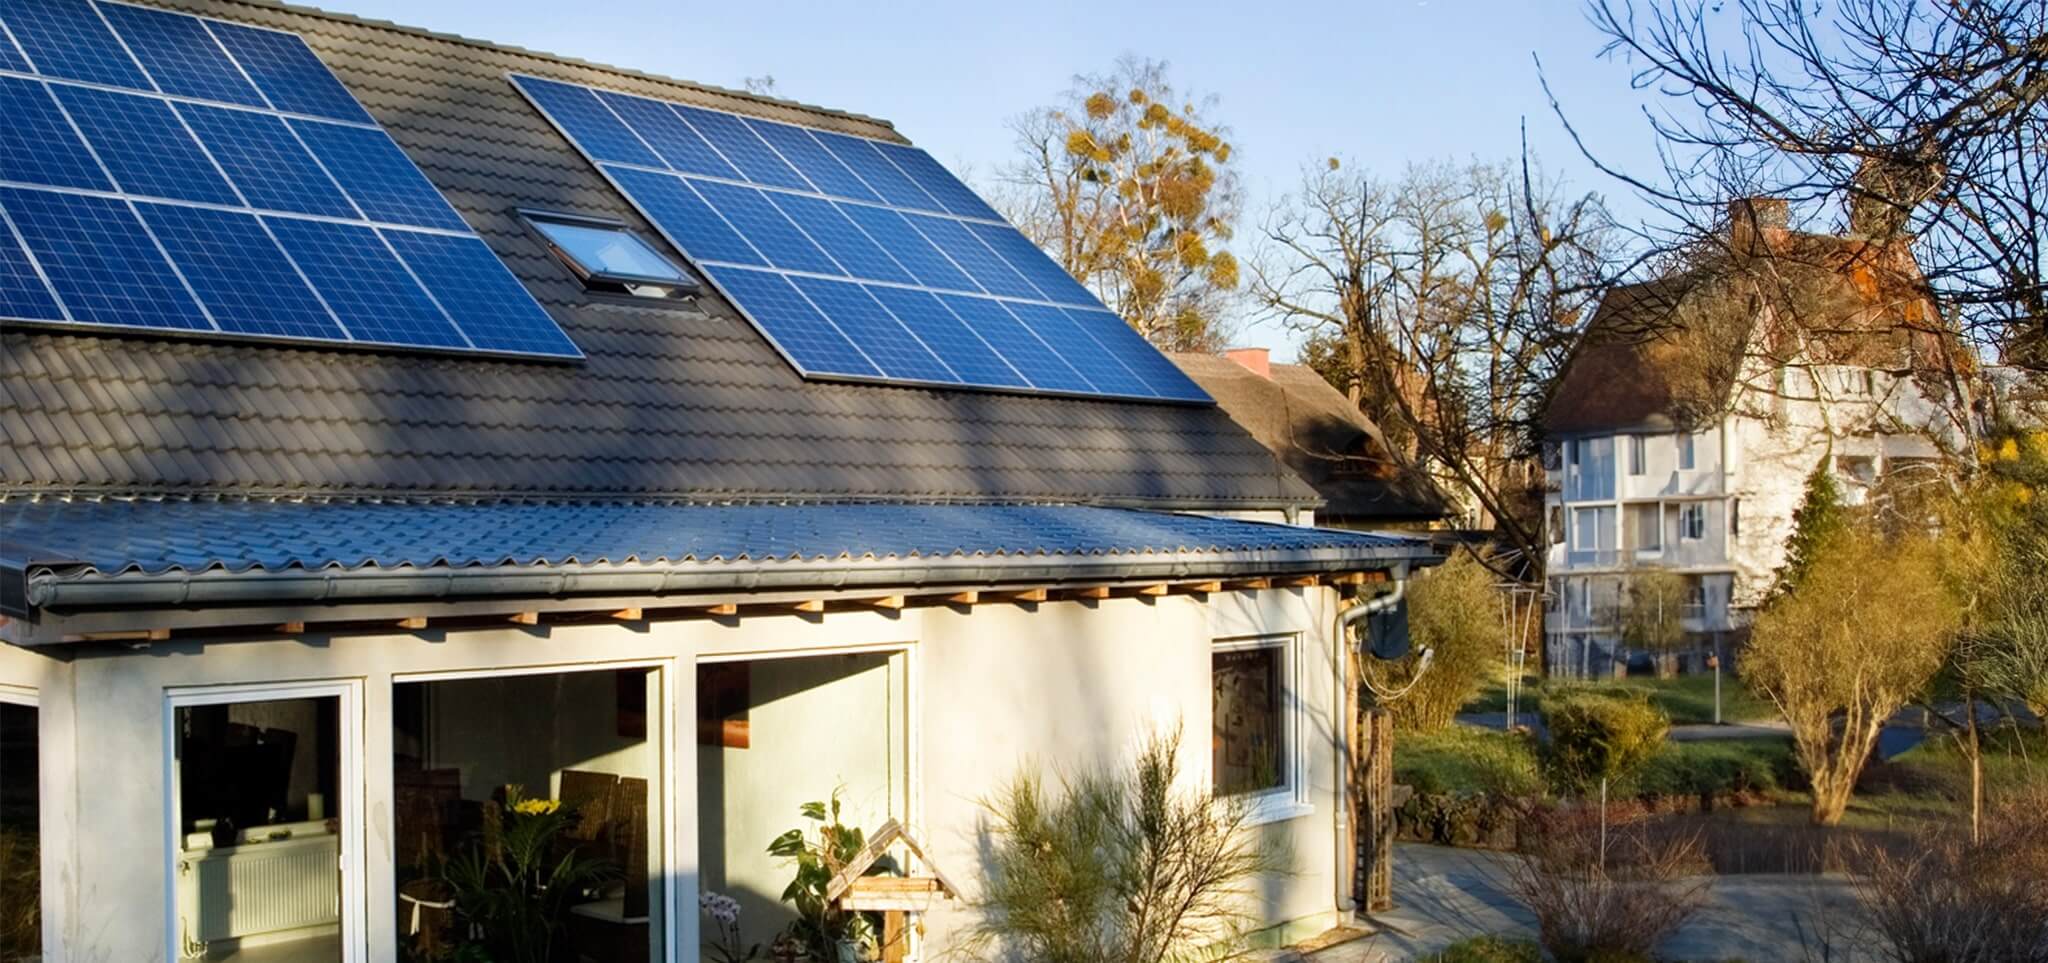 Solar Panels on Metal Roof: Everything You Need To Know